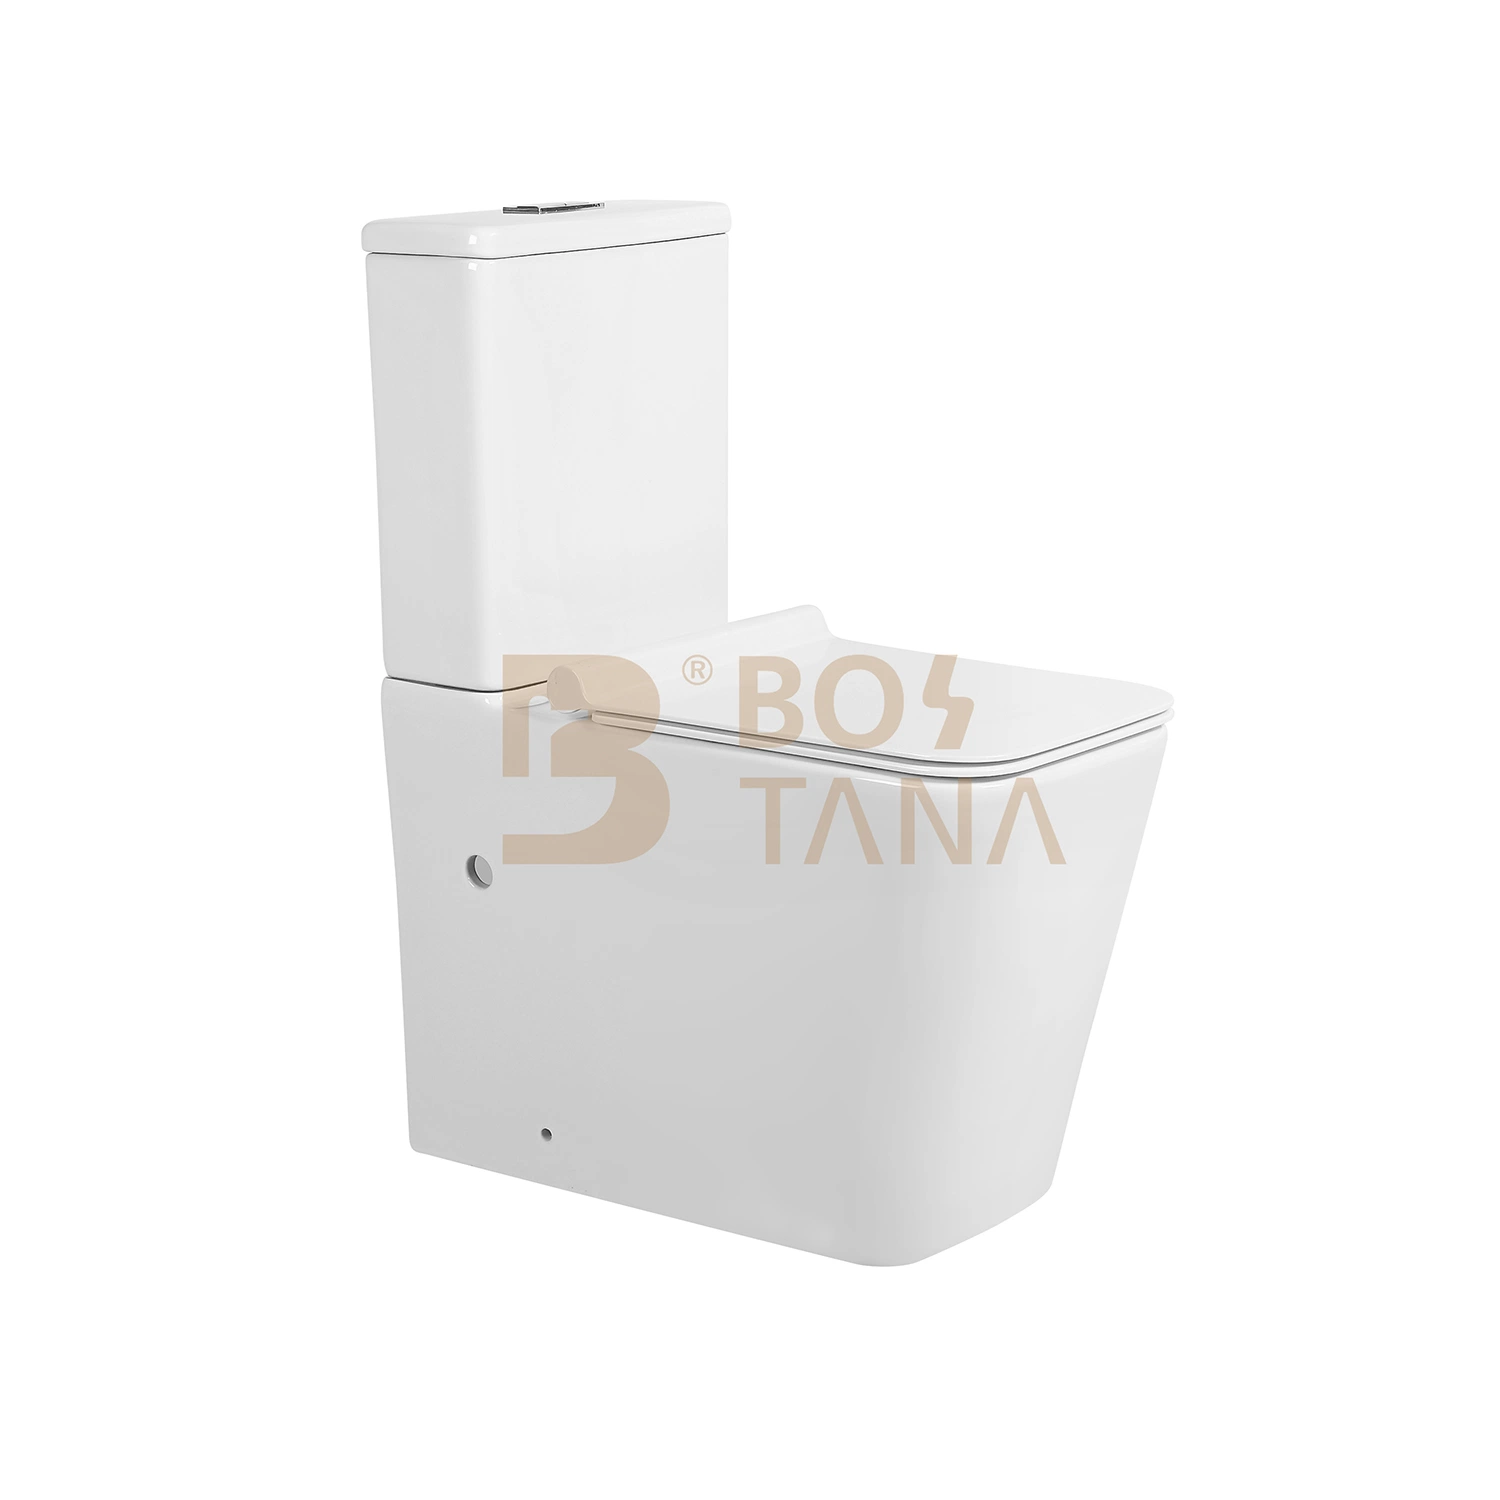 Closet Bathroom Sanitary Ware Two Piece Rimless Watermark Ceramic Toilet with Slim Cover Seat Wc